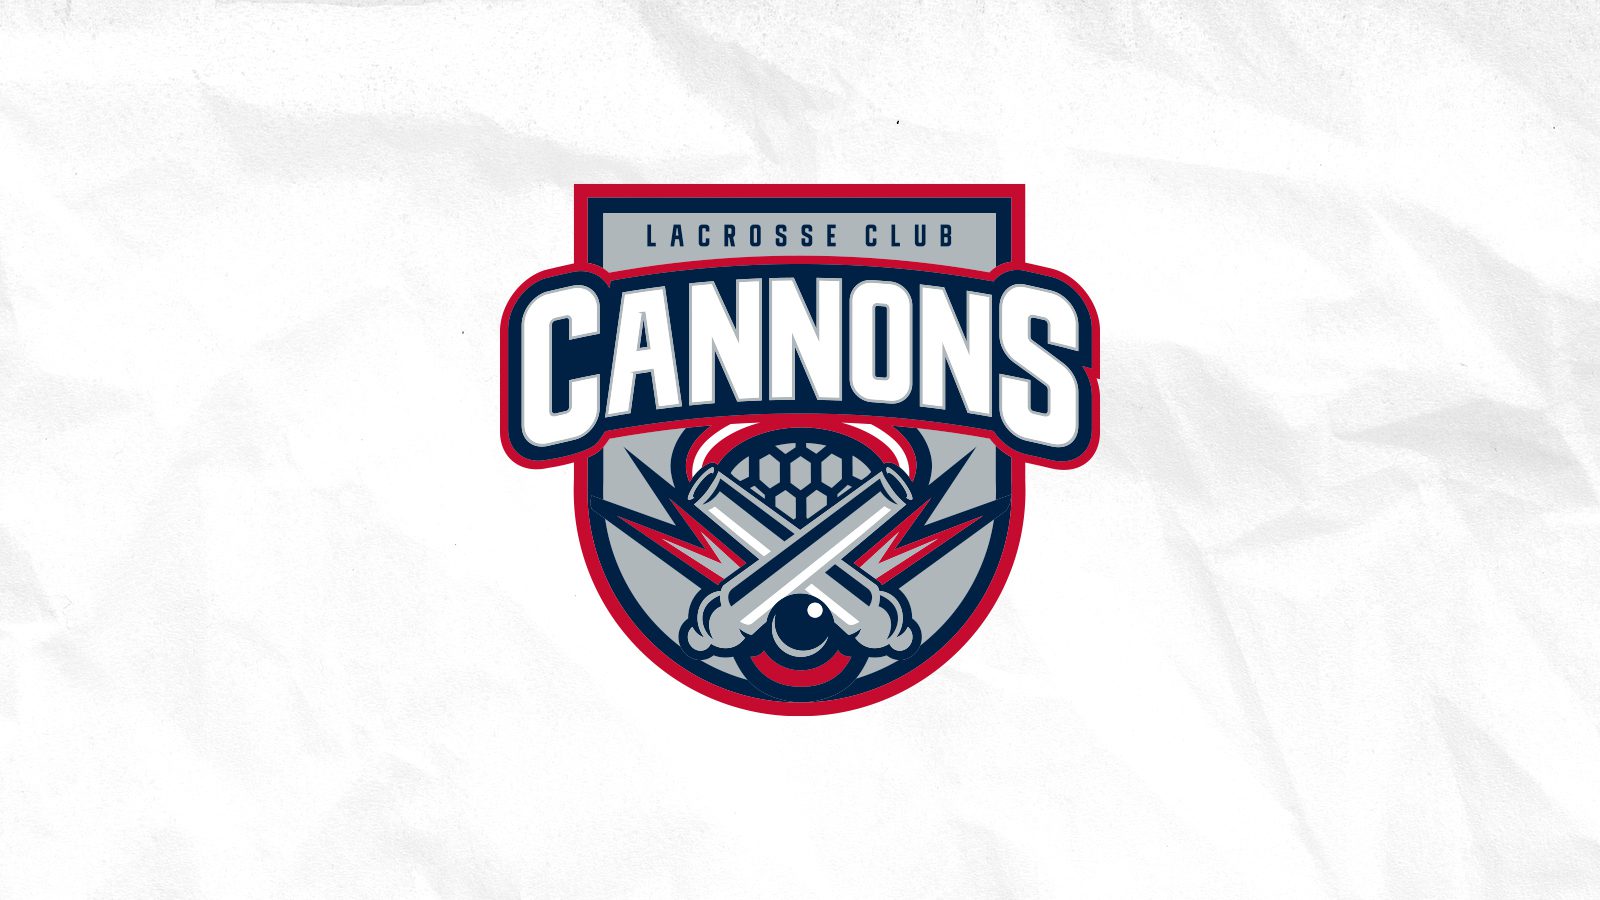 THE 8TH TEAM IN THE PLL  Cannons Lacrosse Club 